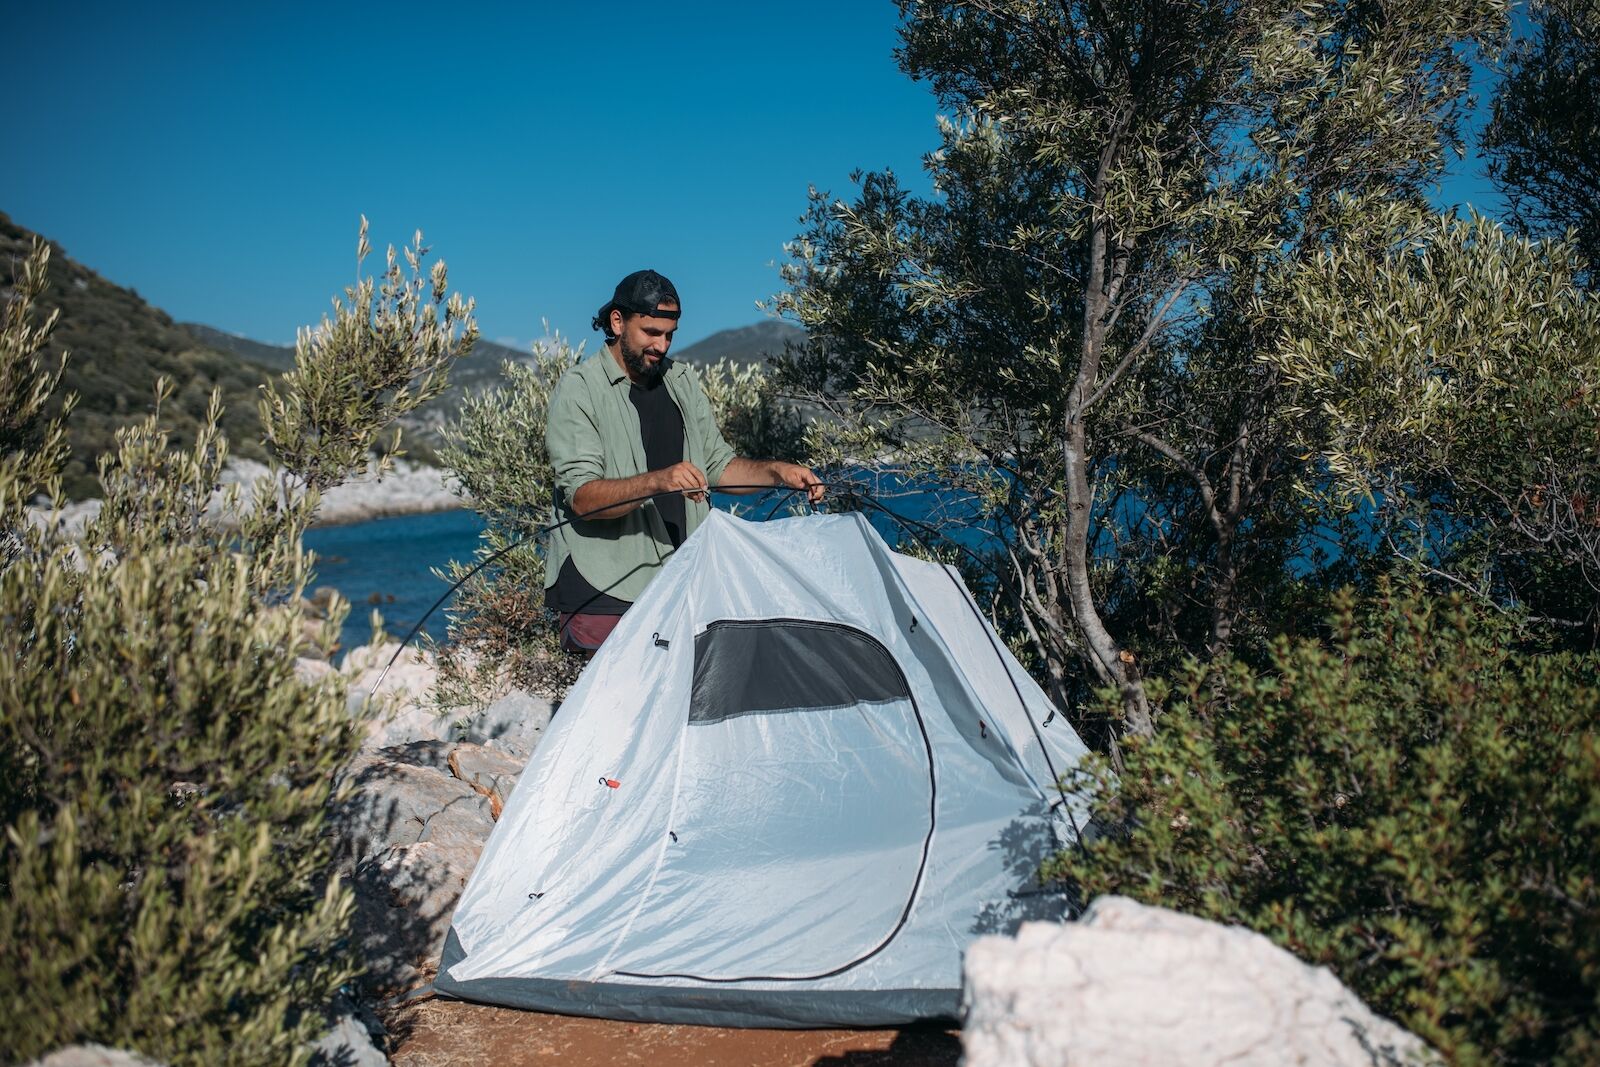 rent camping gear - man with tent and lake